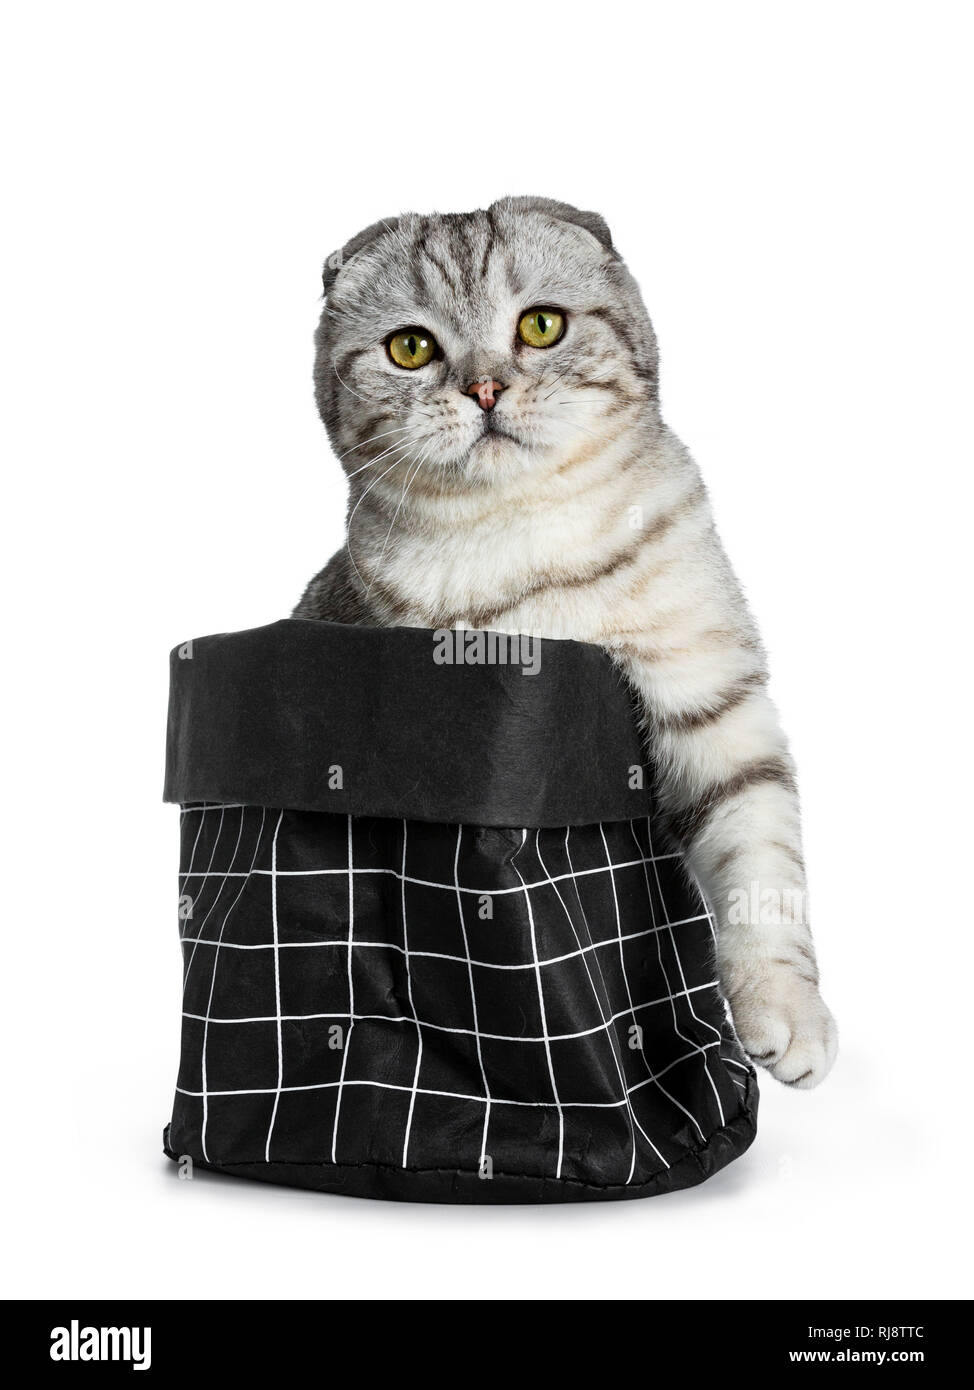 Cute Young Silver Tabby Scottish Fold Cat Kitten Sitting In Black Paper Bag Looking At Camera With Yellow Eyes Isolated On A White Background One Pa Stock Photo Alamy